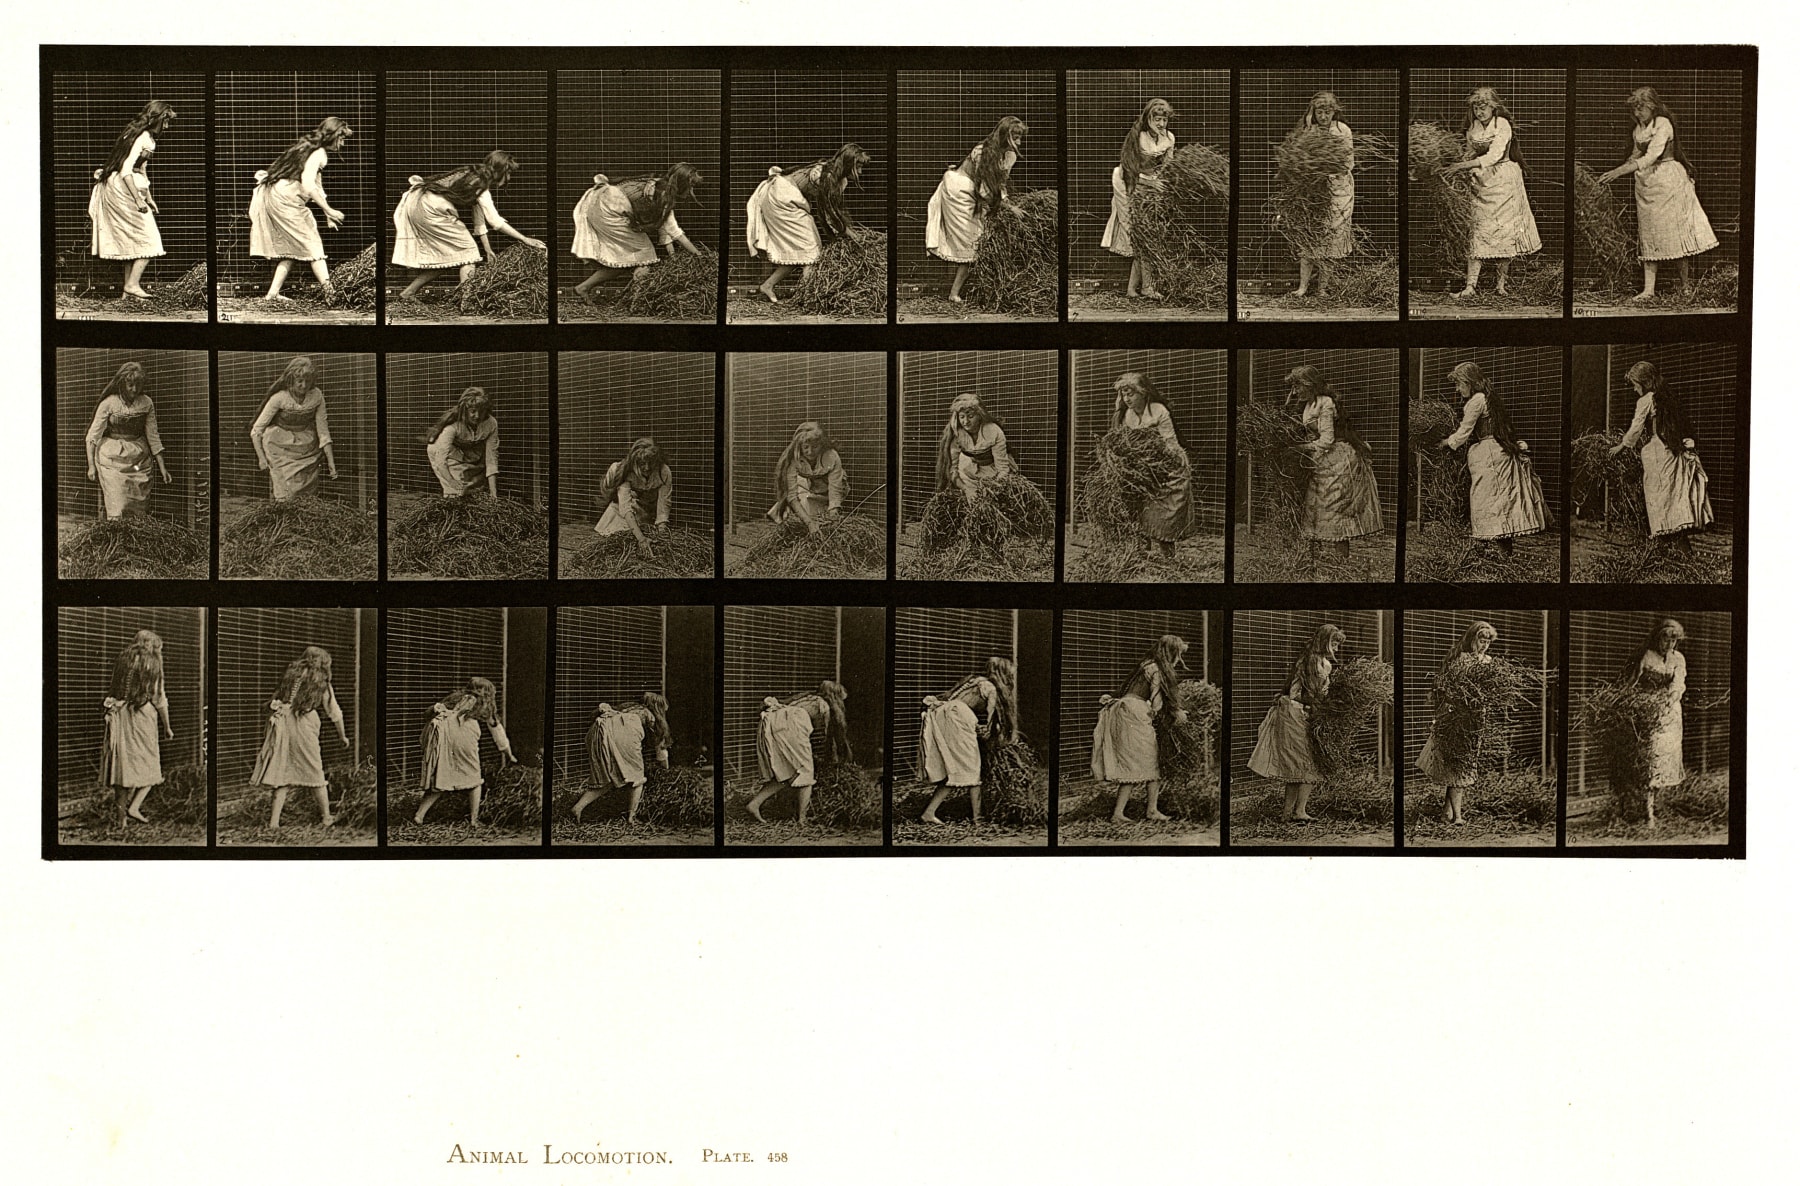 Sequence of black and white photos showing the movements of a man lifting handfuls of hay and putting them down